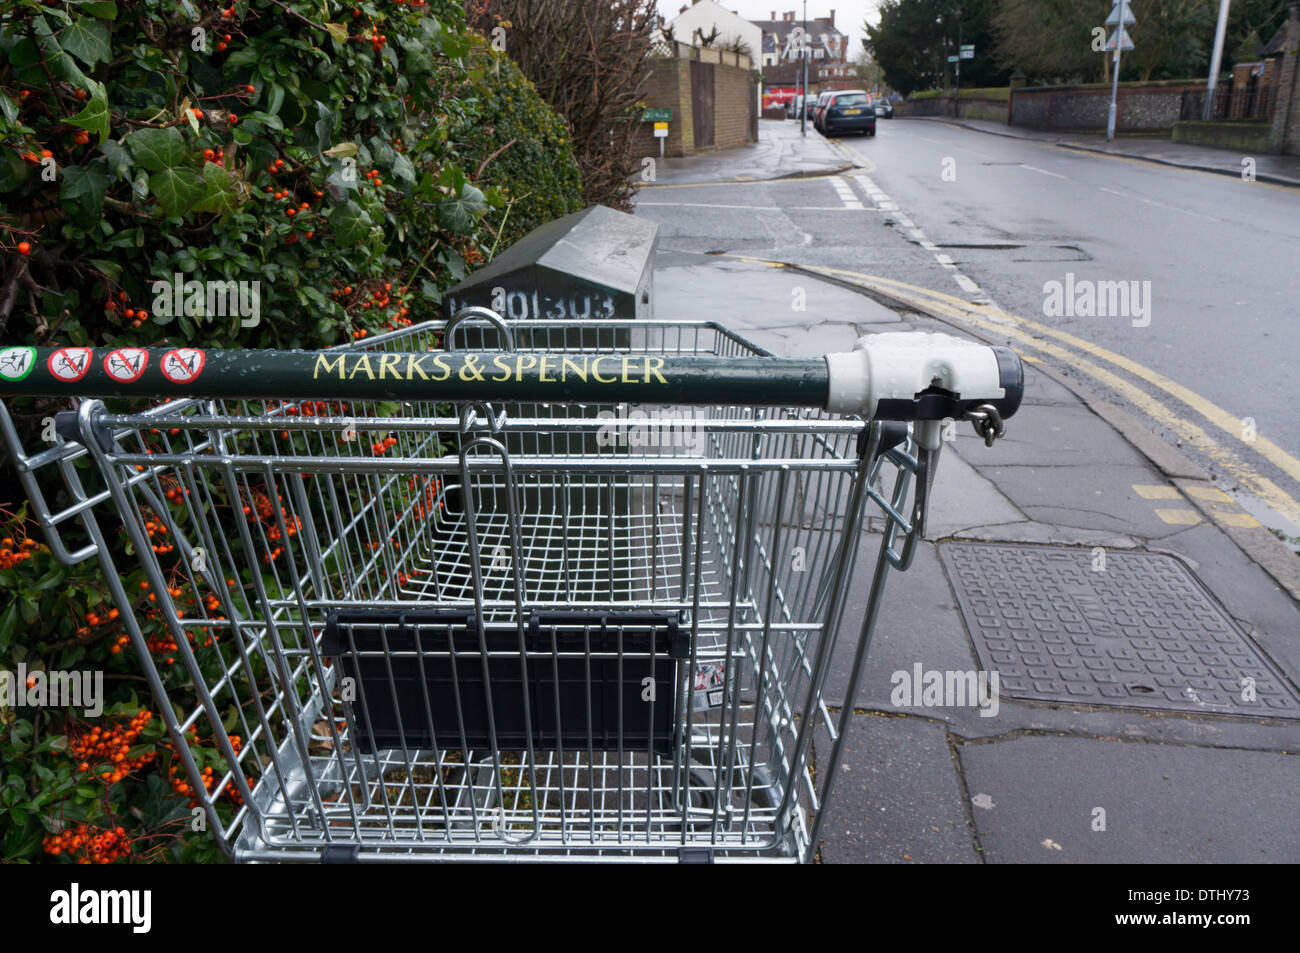 An abandoned Marks & Spencer trolley on the pavement of a quiet suburban street. Stock Photo